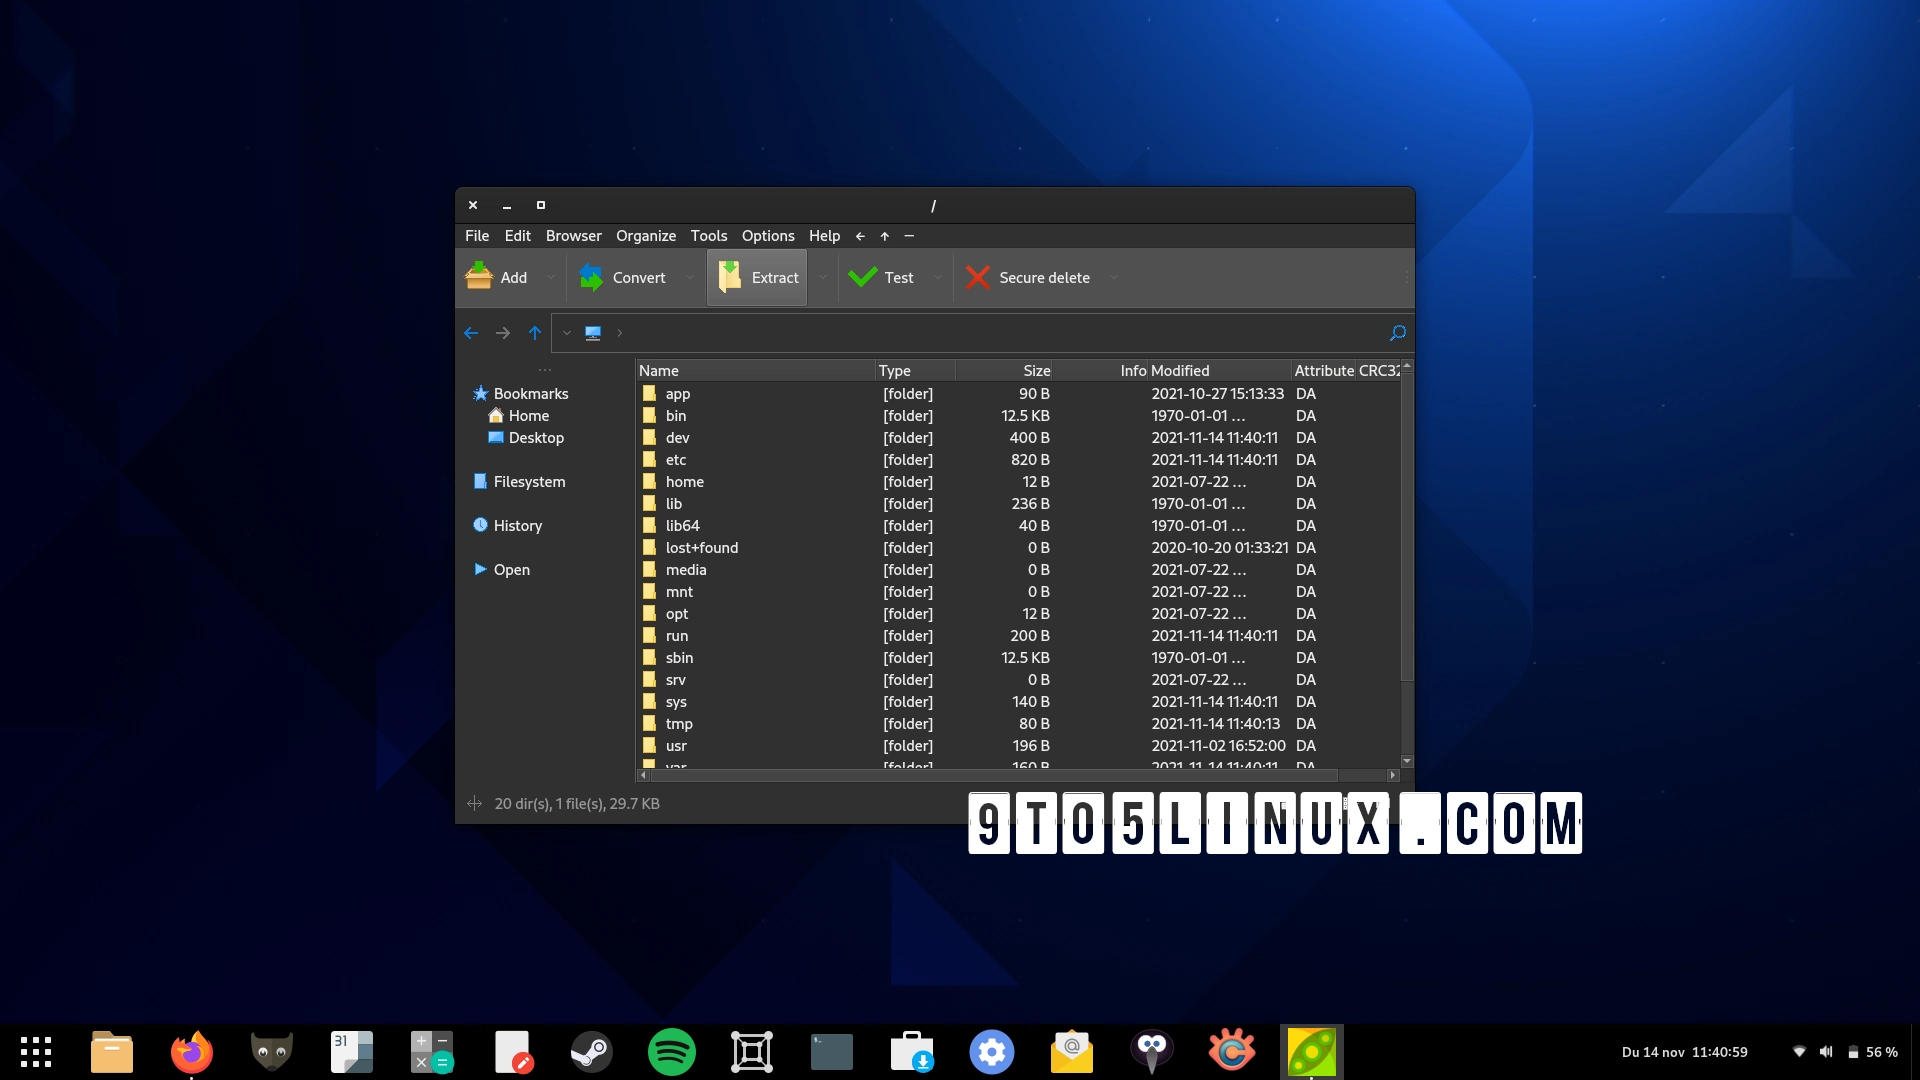 PeaZip 8.3 Open-Source Archive Manager Brings Better Xfce Integration, New Linux Features